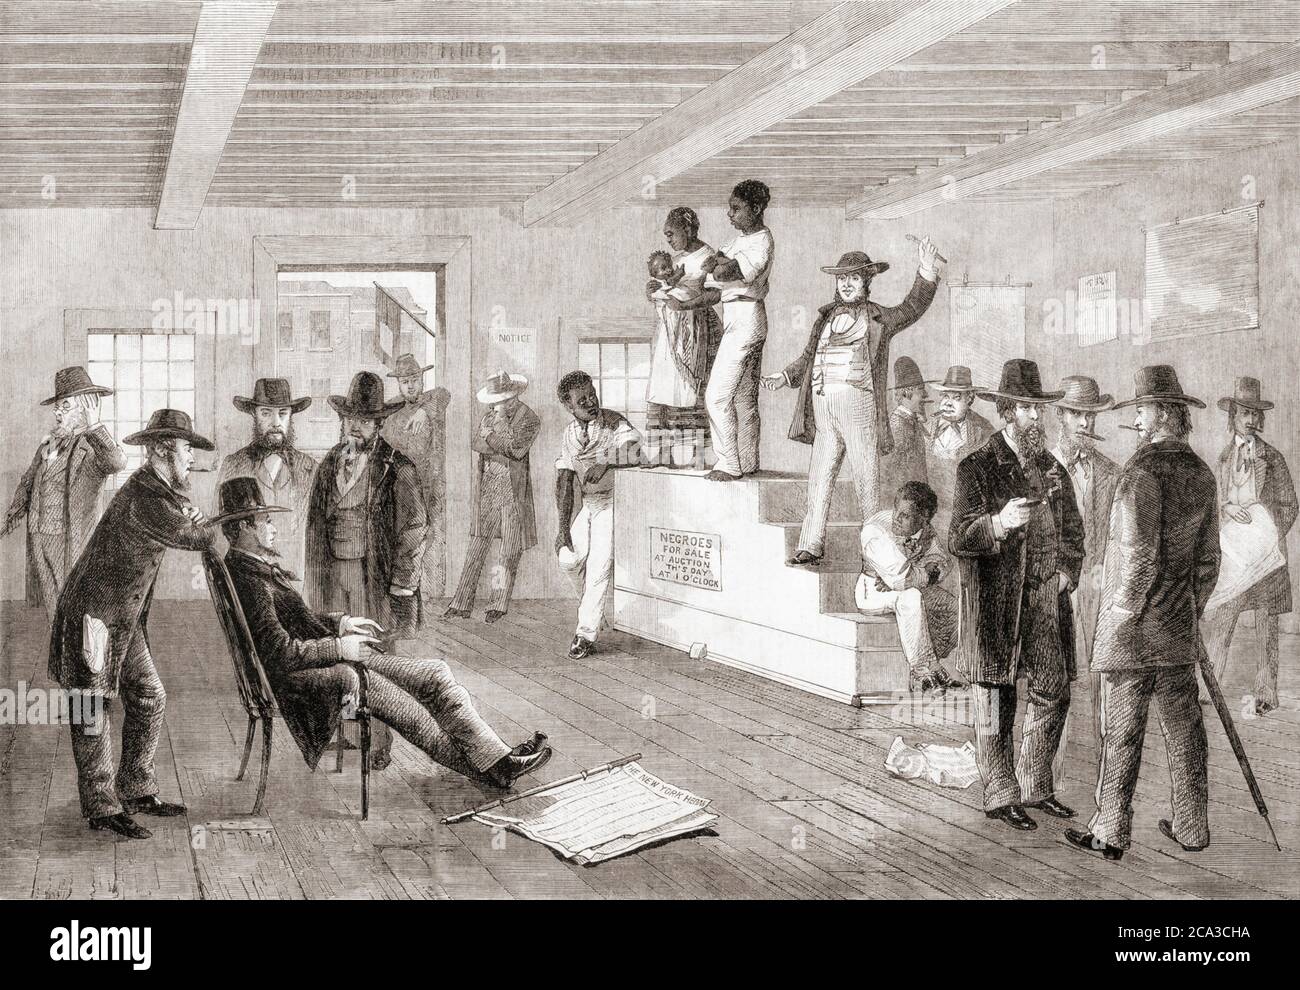 A slave auction in Virginia, USA, in the mid 19th-century. After an illustration by an unidentified artist in the Illustrated London News, February Stock Photo